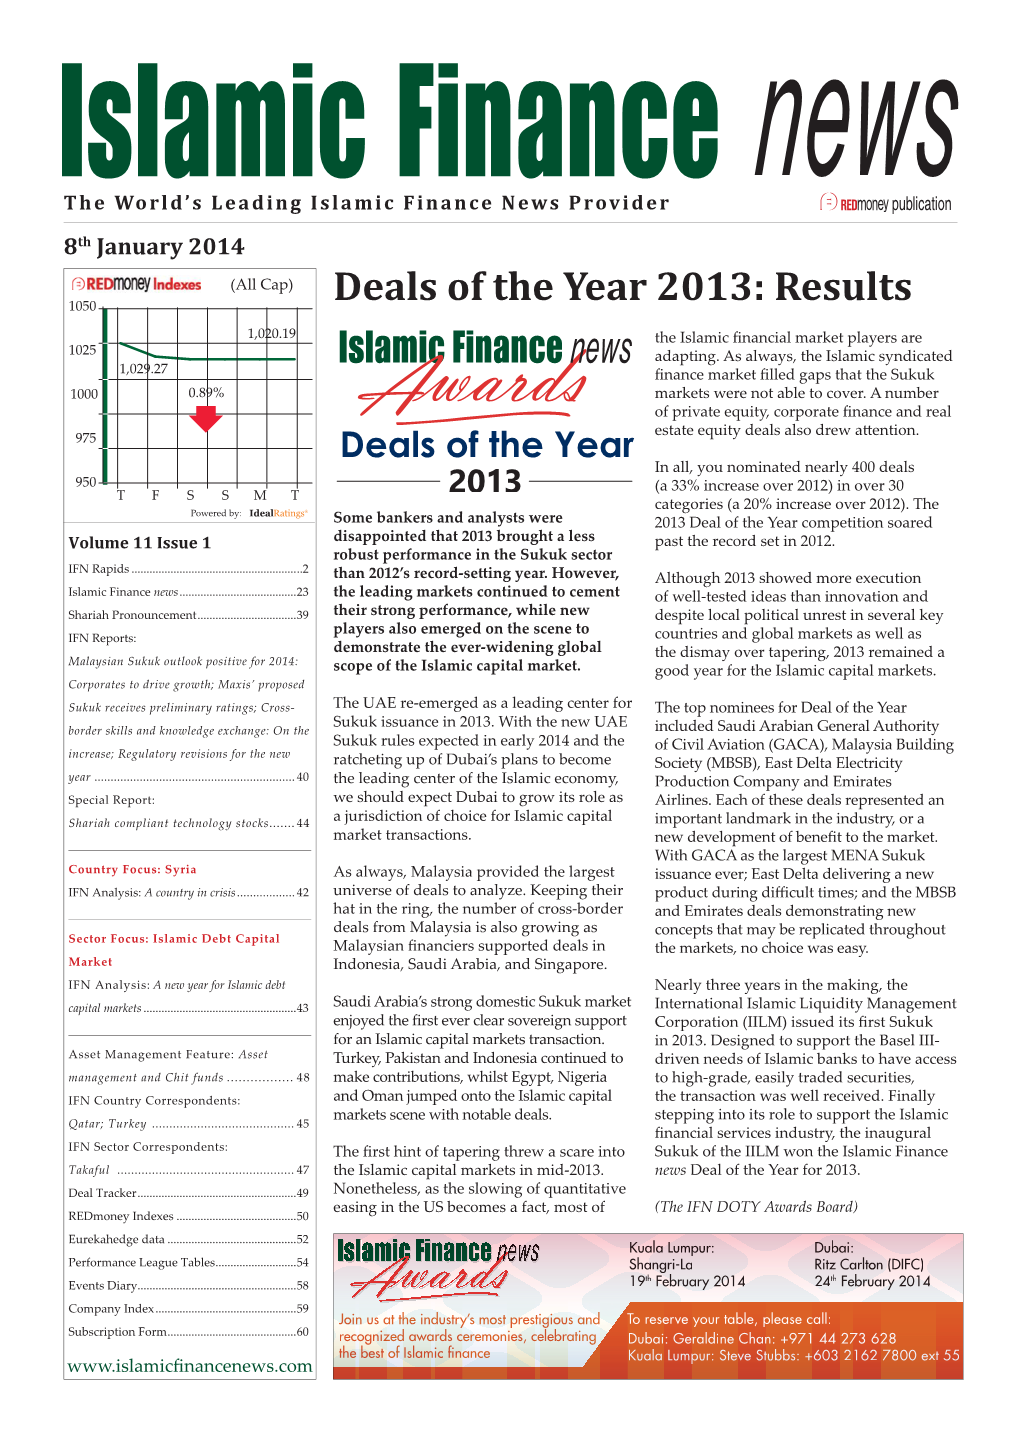 Deals of the Year 2013: Results